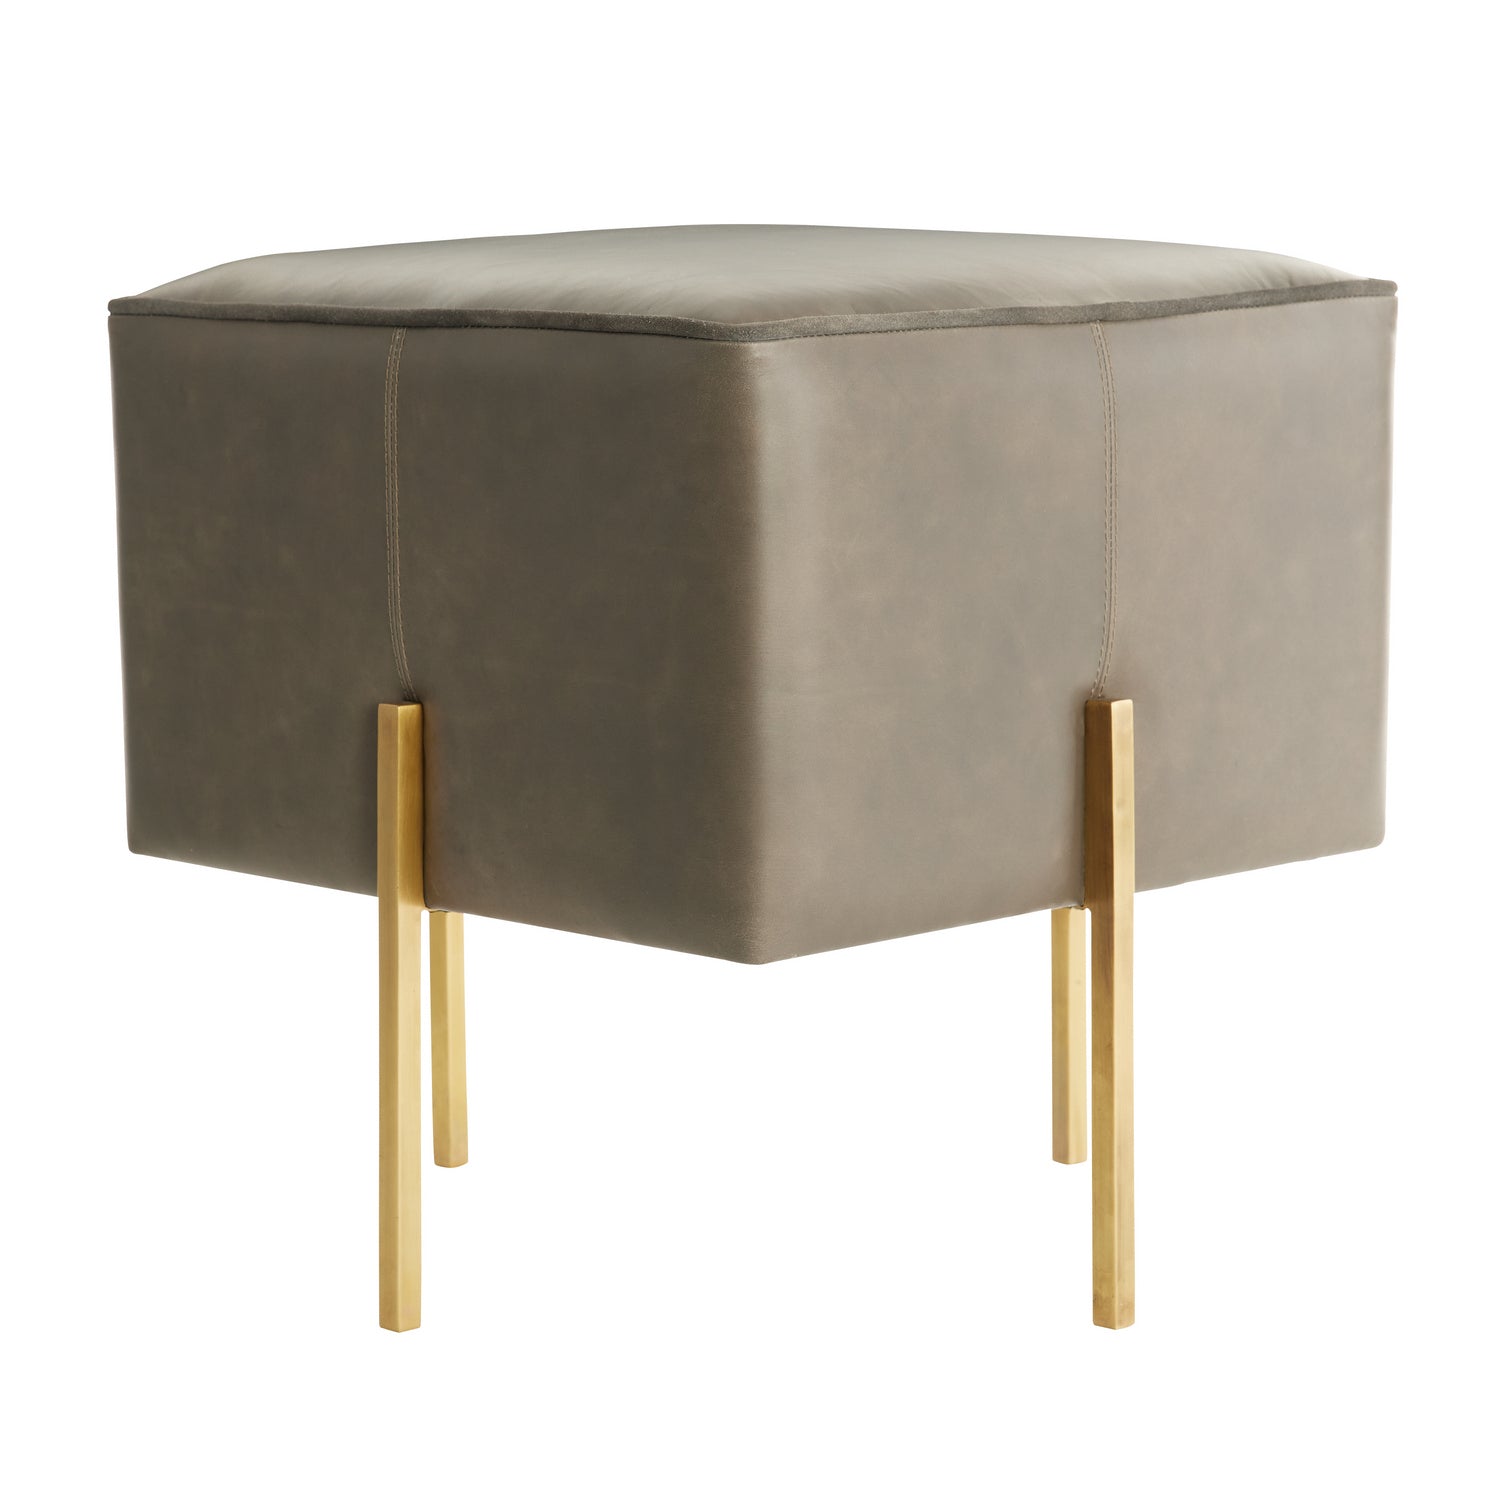 Stool from the Kensington collection in Morel finish